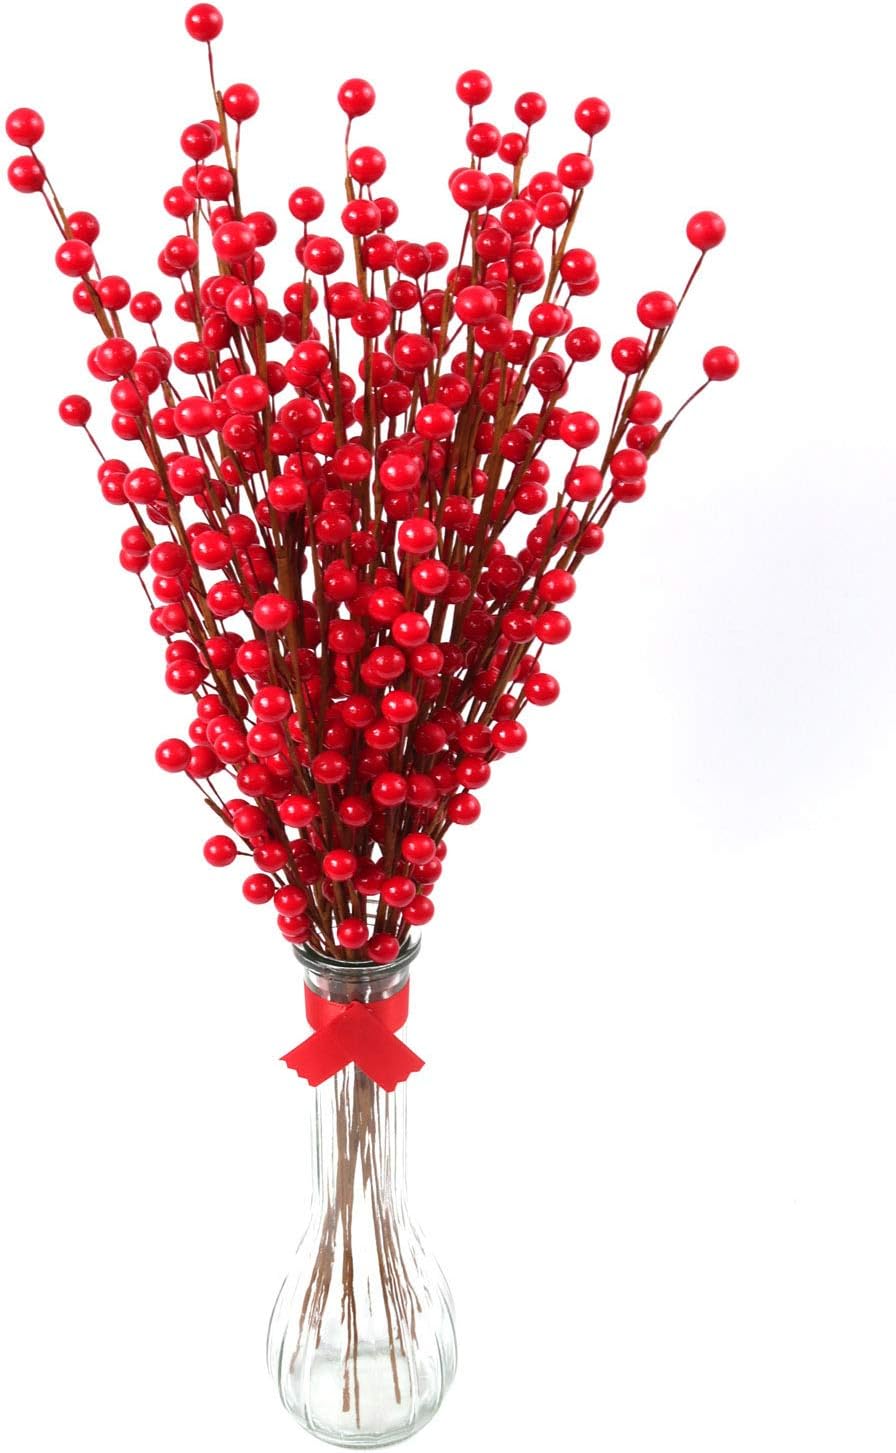 Red Holly Berry Stems with 35 Lifelike Berries | 17-Inch | Holiday Xmas Accents | Trees, Wreaths, & Garlands | Gift Wrapping | Christmas Berries | Home & Office Decor (Set of 48)